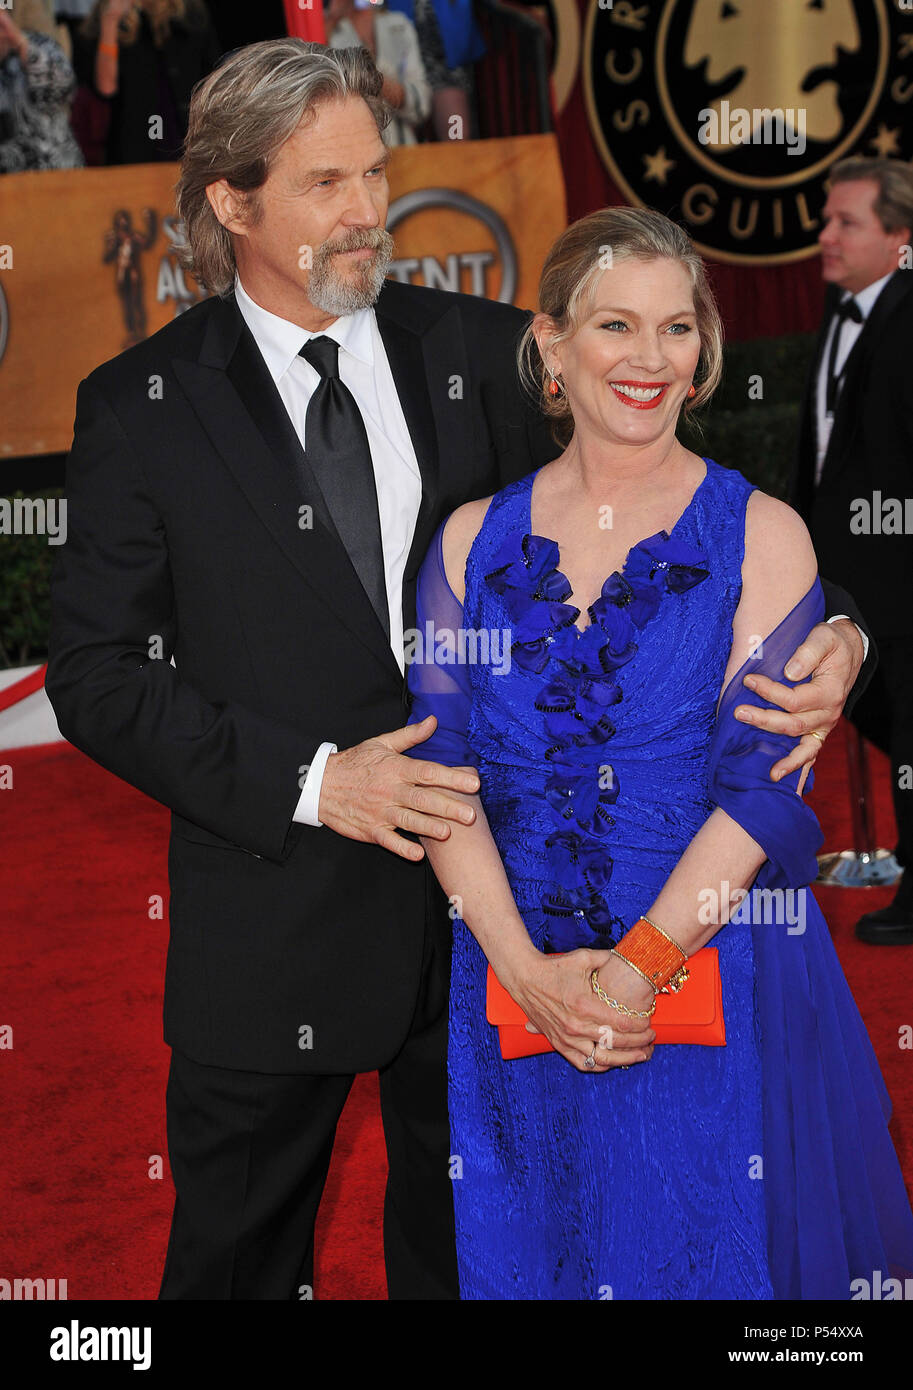 Jeff Bridges Susan Geston  190   - 16 th Annual Screen Actors Guild Awards at the Shrine Auditorium in Los Angeles.Jeff Bridges Susan Geston  190  Event in Hollywood Life - California, Red Carpet Event, USA, Film Industry, Celebrities, Photography, Bestof, Arts Culture and Entertainment, Celebrities fashion, Best of, Hollywood Life, Event in Hollywood Life - California, Red Carpet and backstage, Music celebrities, Topix, Couple, family ( husband and wife ) and kids- Children, brothers and sisters inquiry tsuni@Gamma-USA.com, Credit Tsuni / USA, 2010 Stock Photo